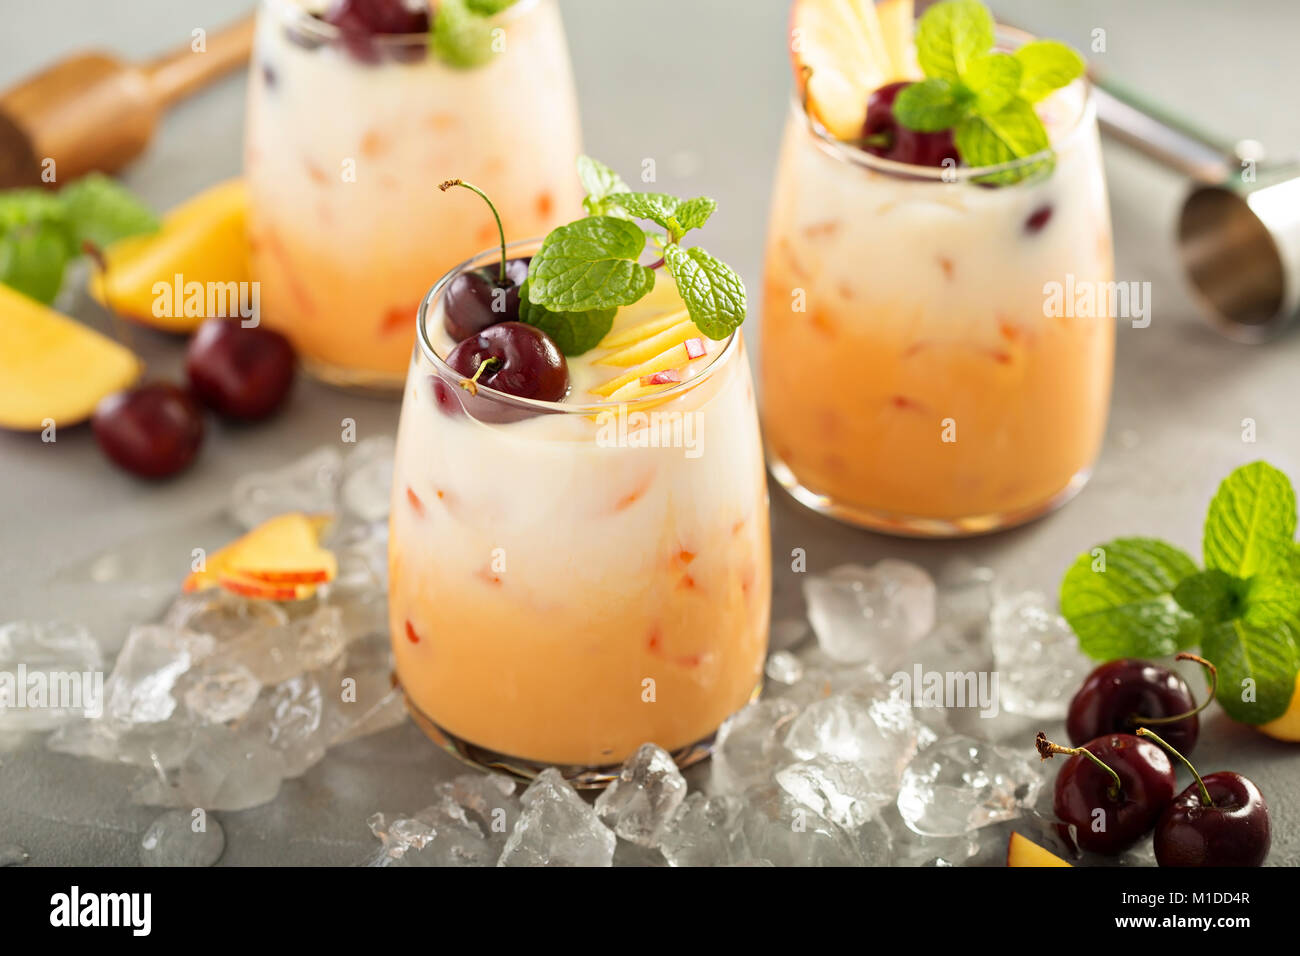 Summer cherry and peach coconut milk cocktail Stock Photo